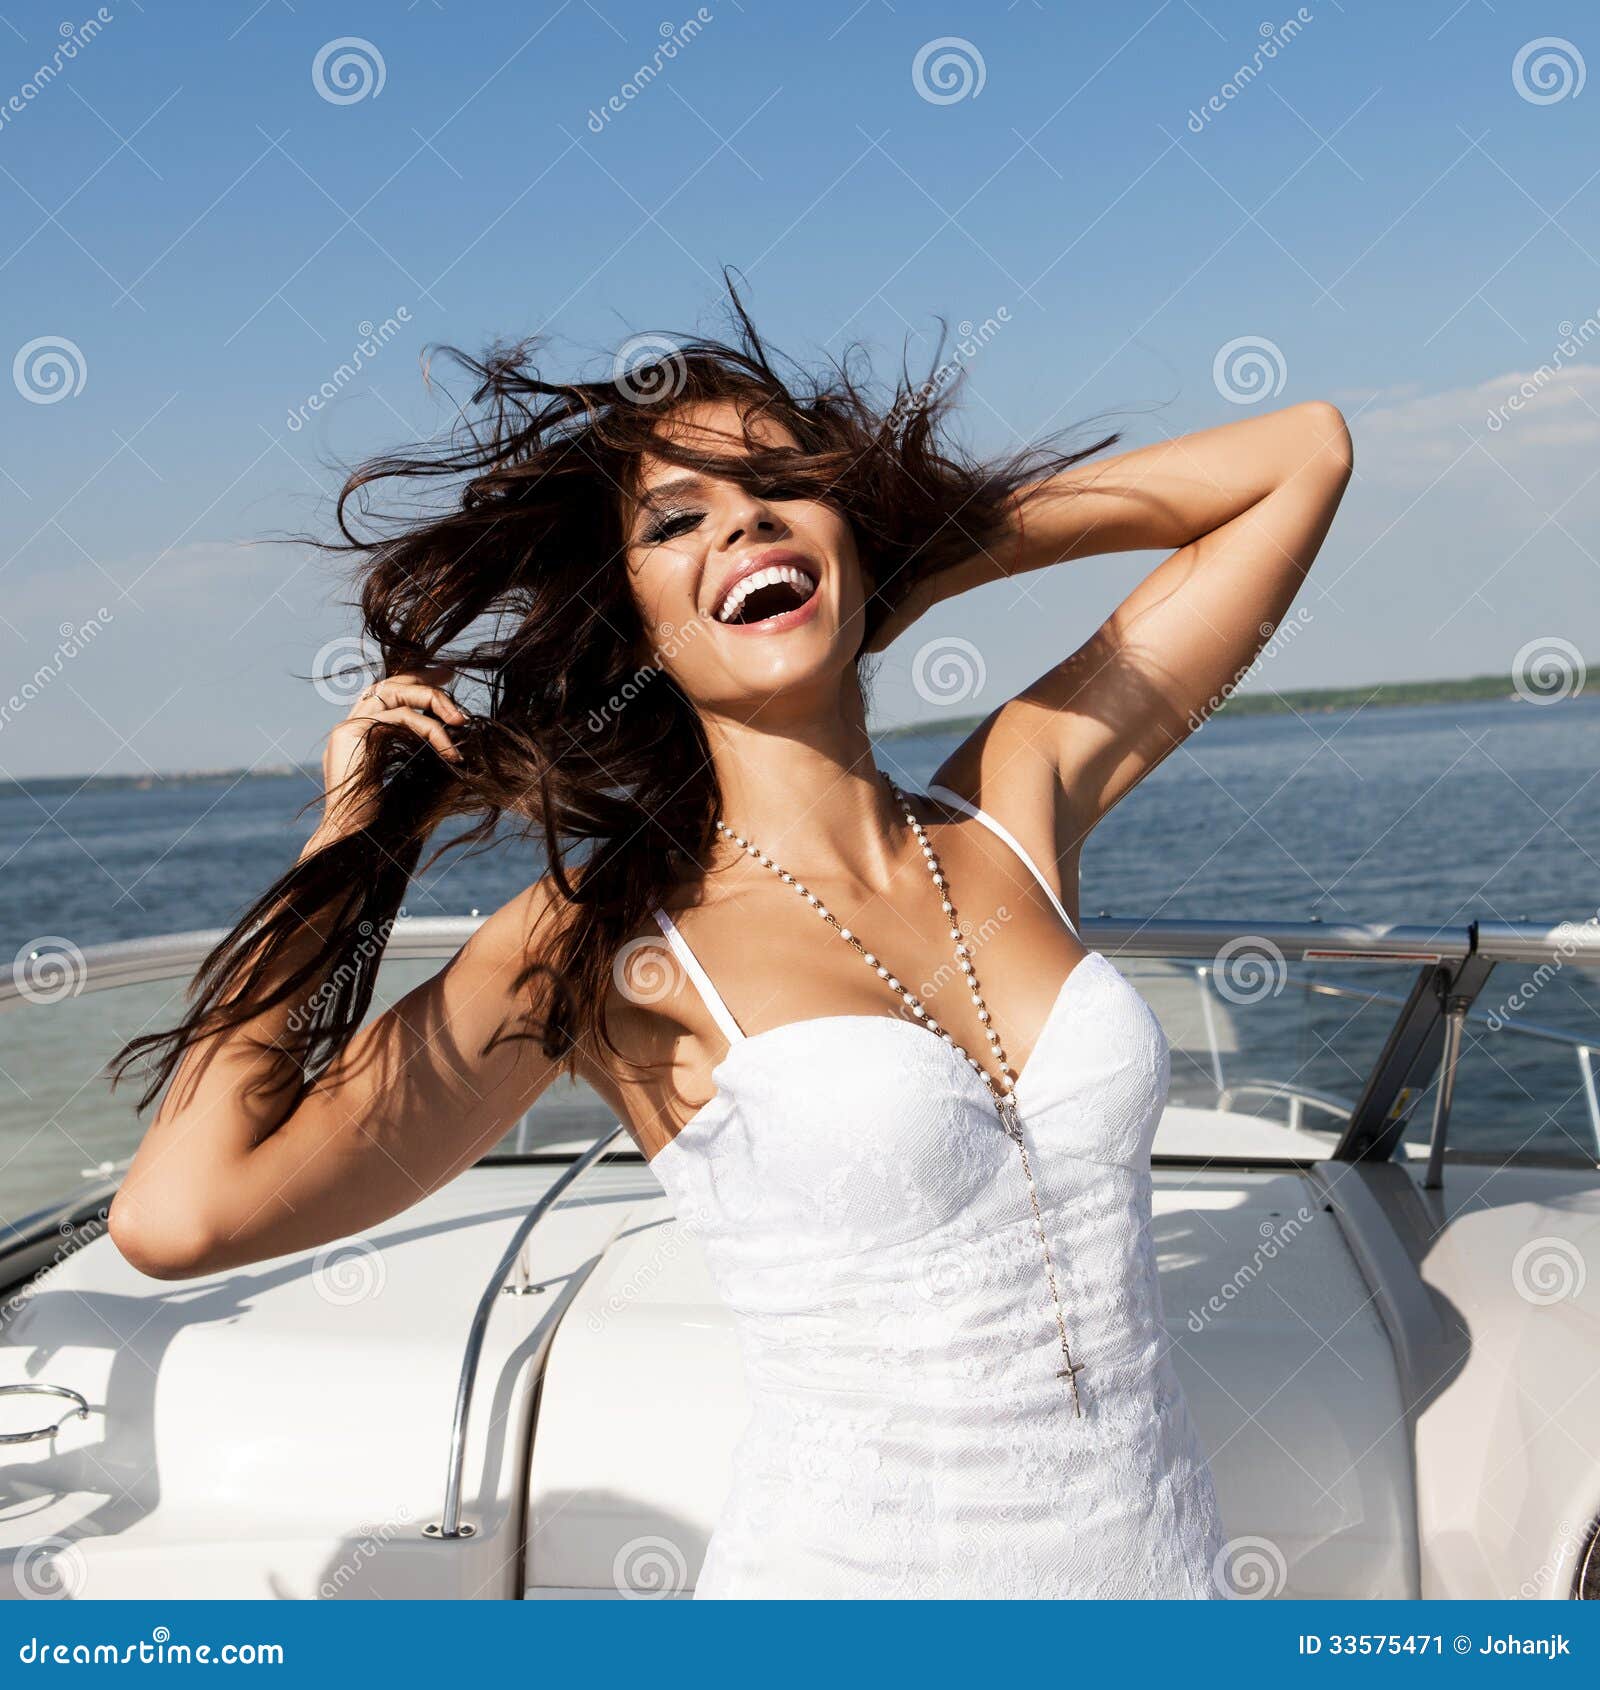 Boat happy woman smiling happy looking at the sea sailing by 